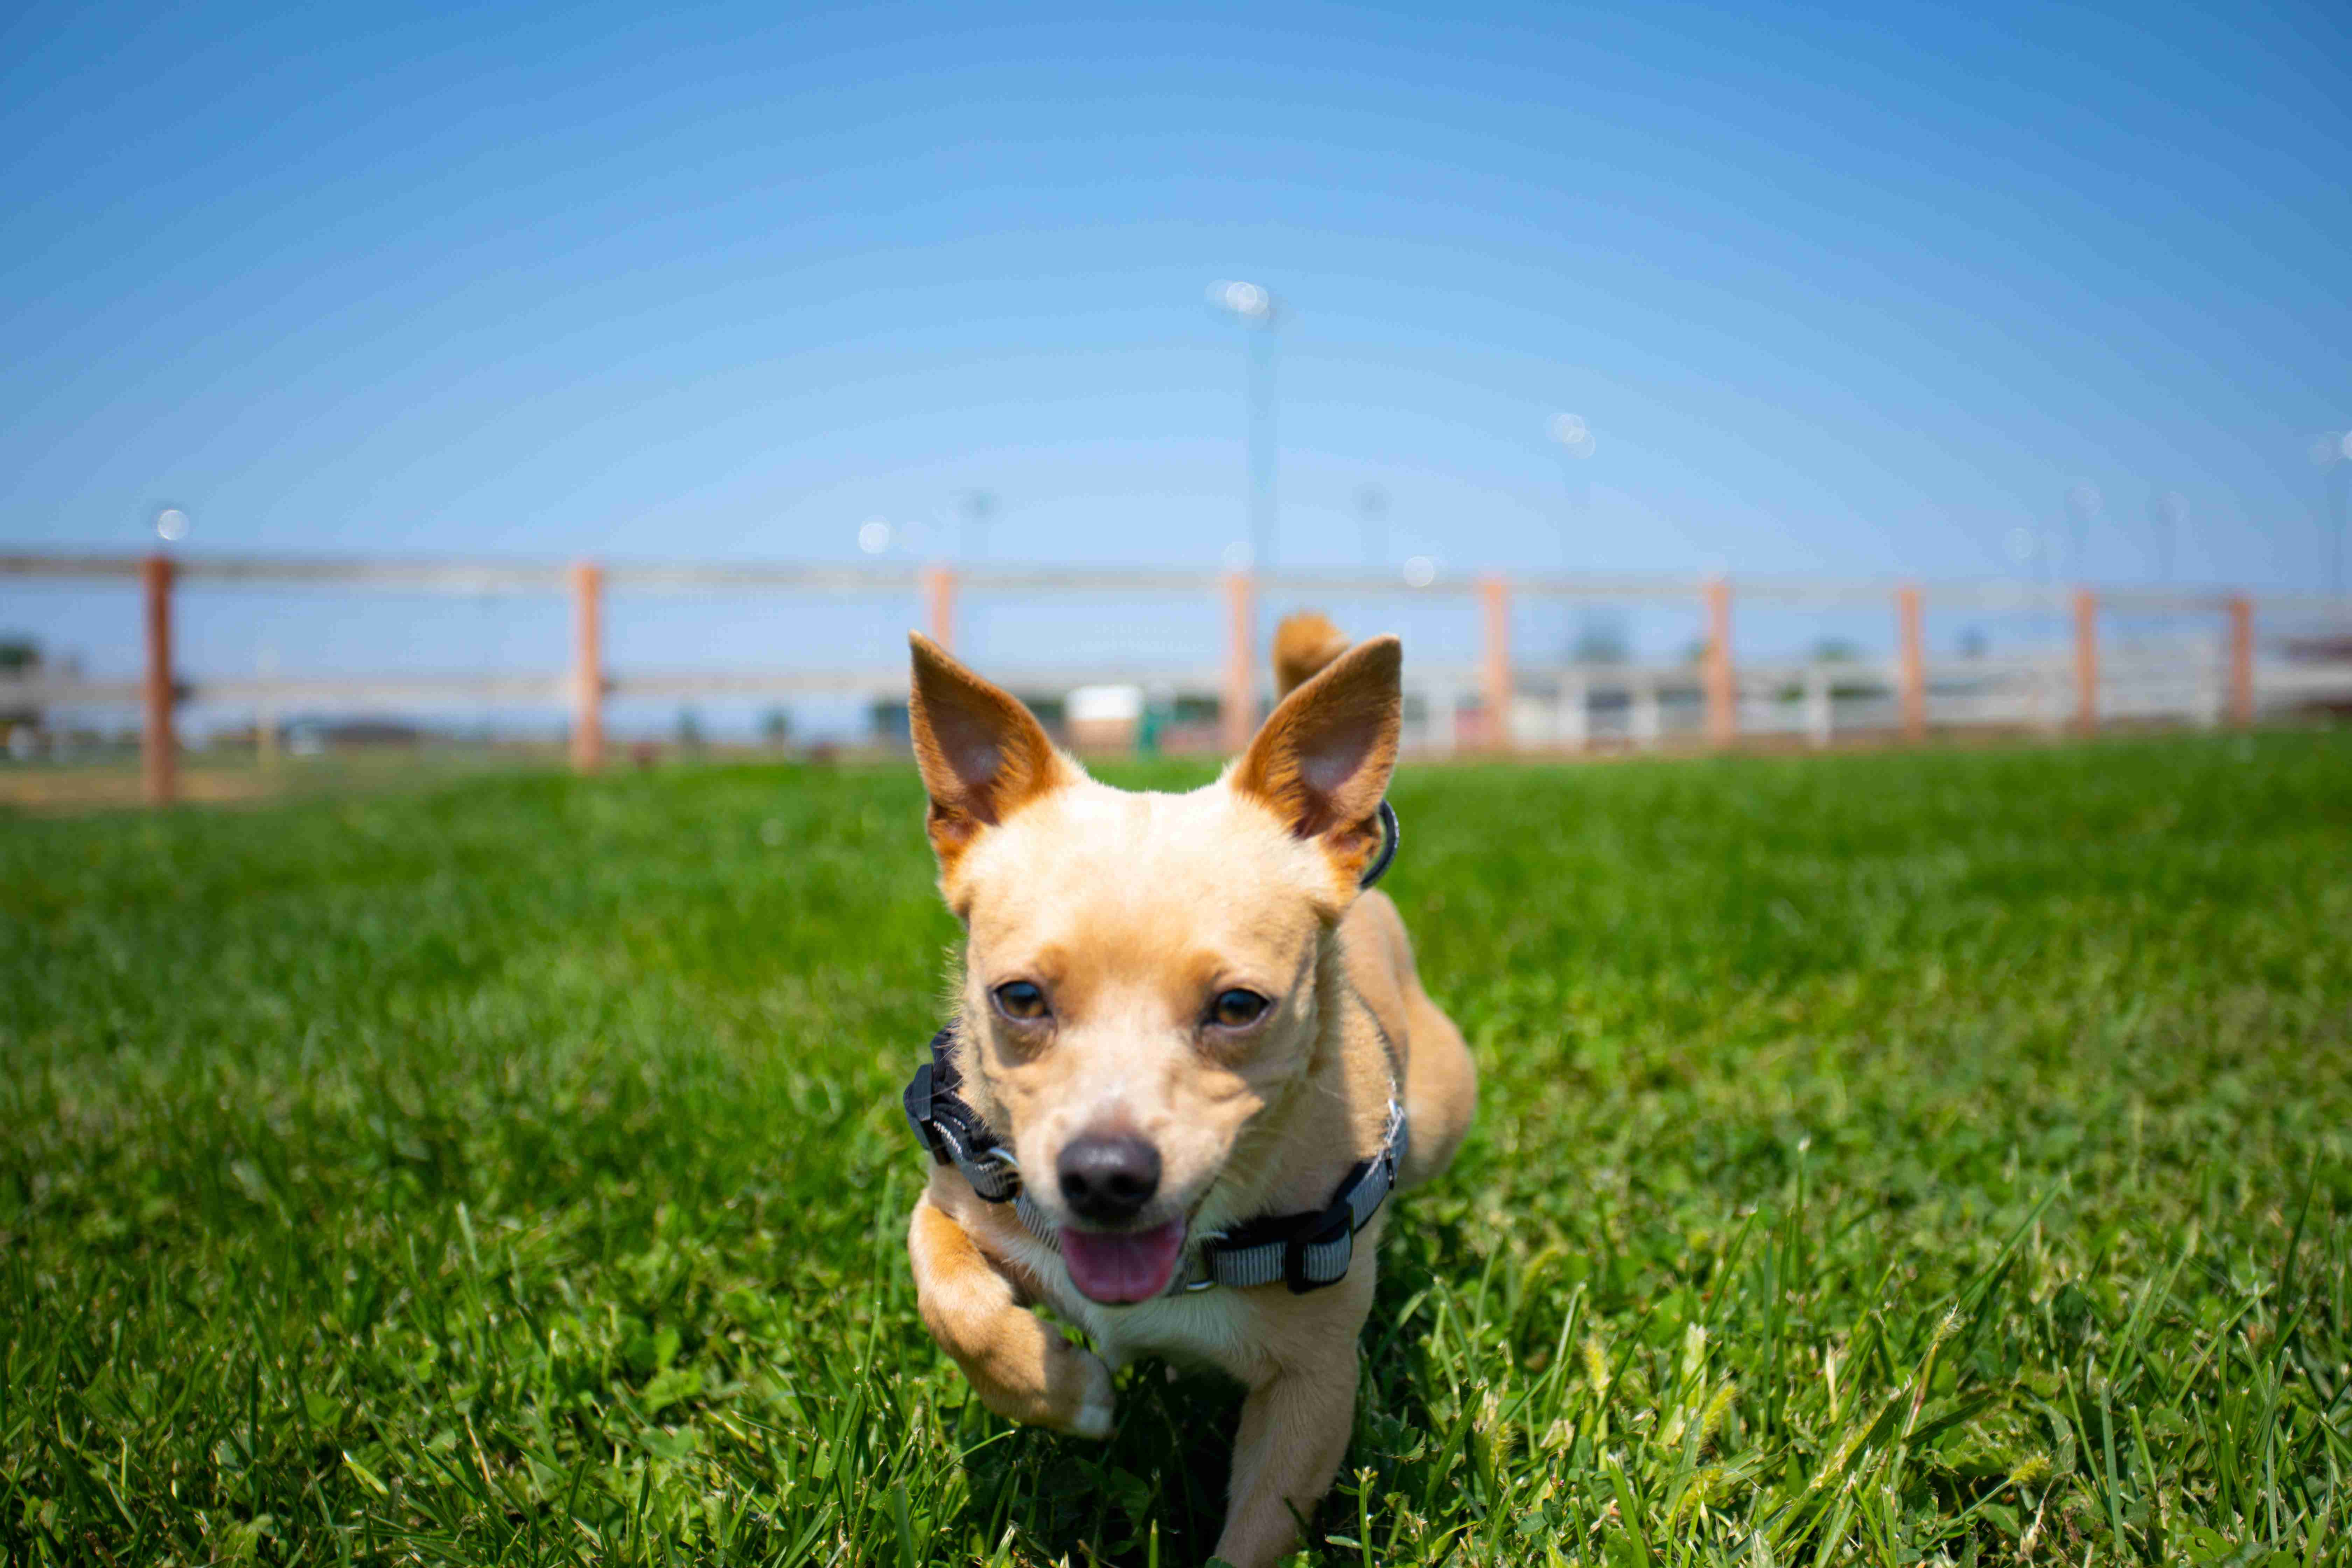 What are some effective training techniques for managing Chihuahua aggression?